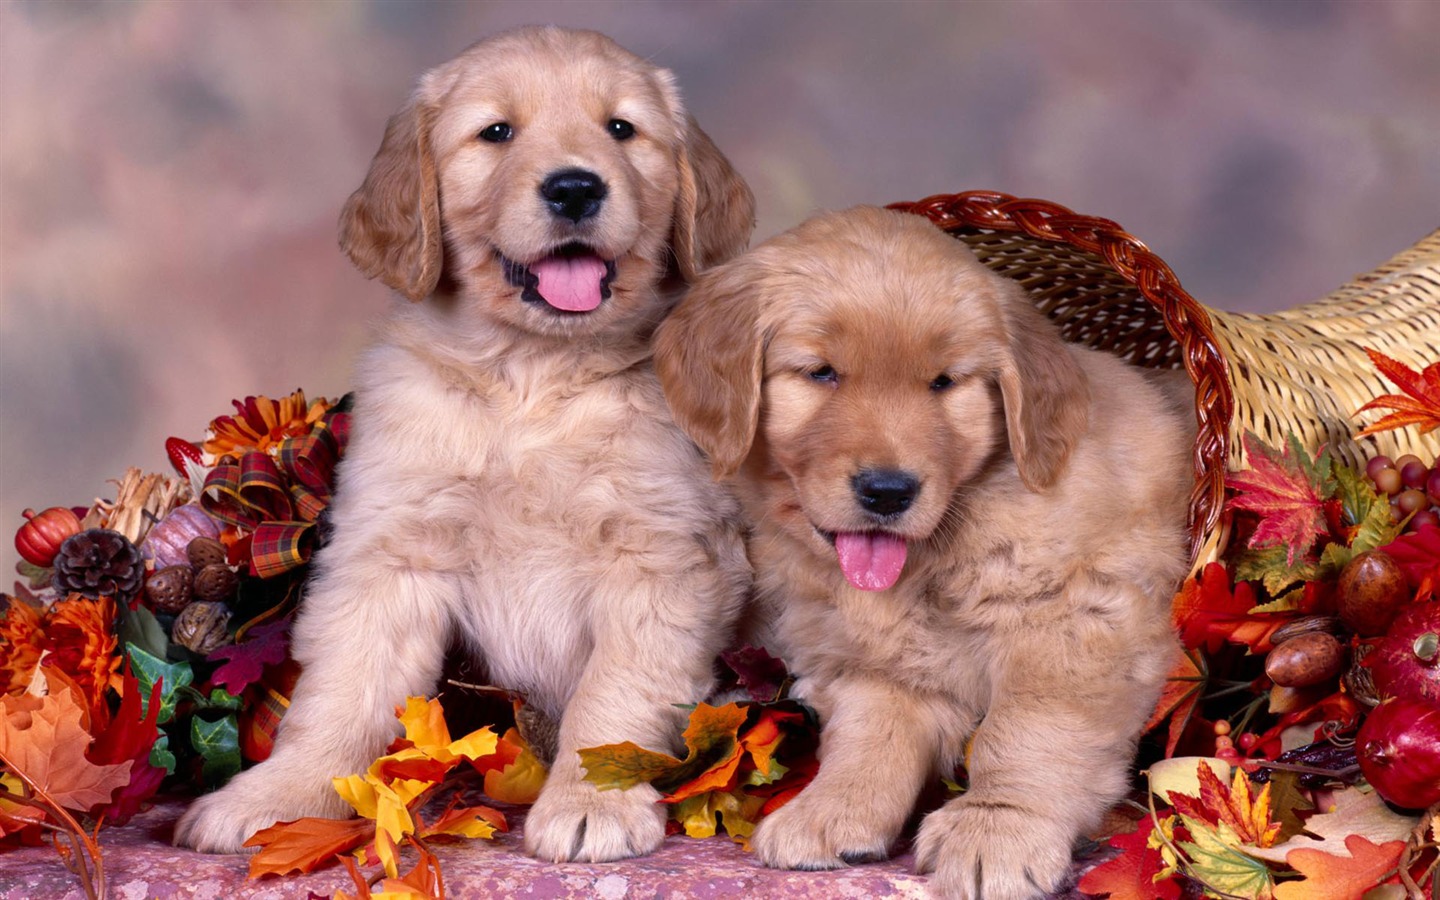 Puppy Photo HD wallpapers (2) #12 - 1440x900